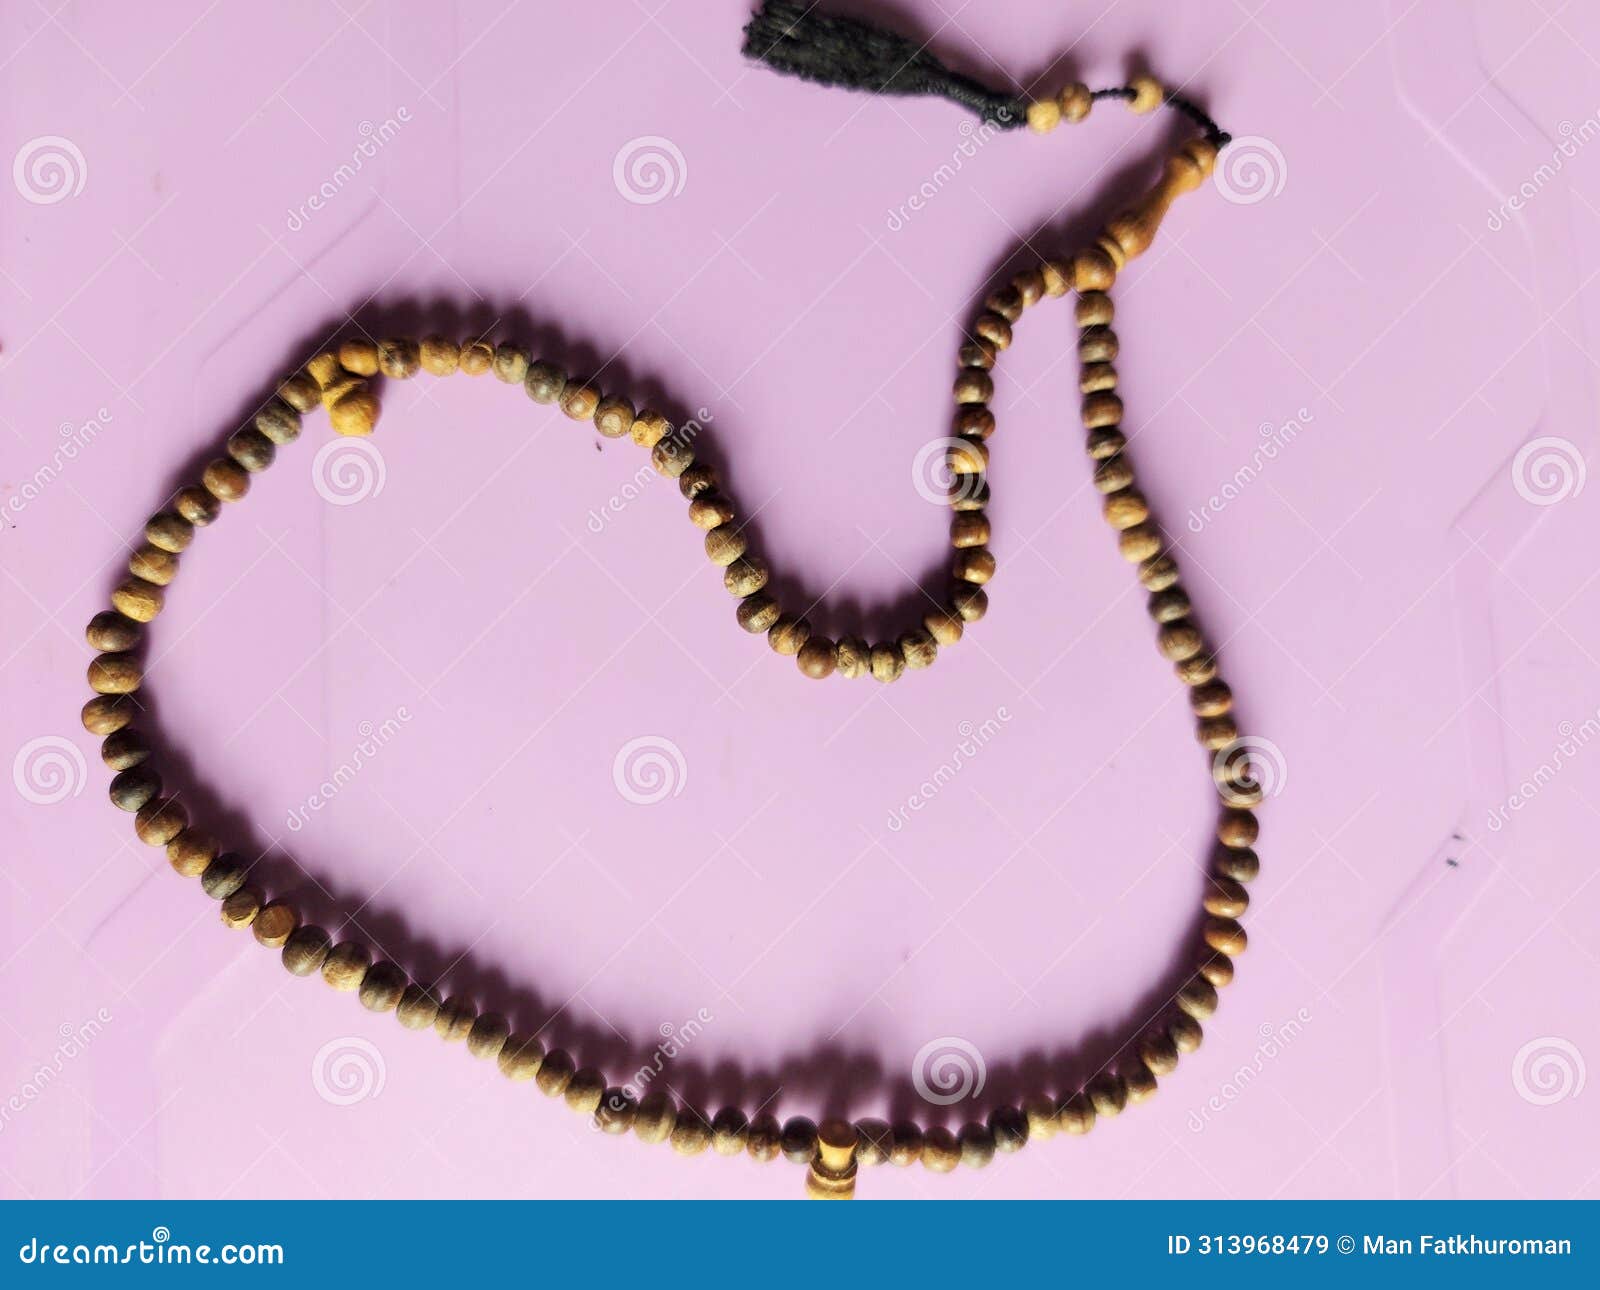 wooden prayer beads are commonly used by muslims for dhikr